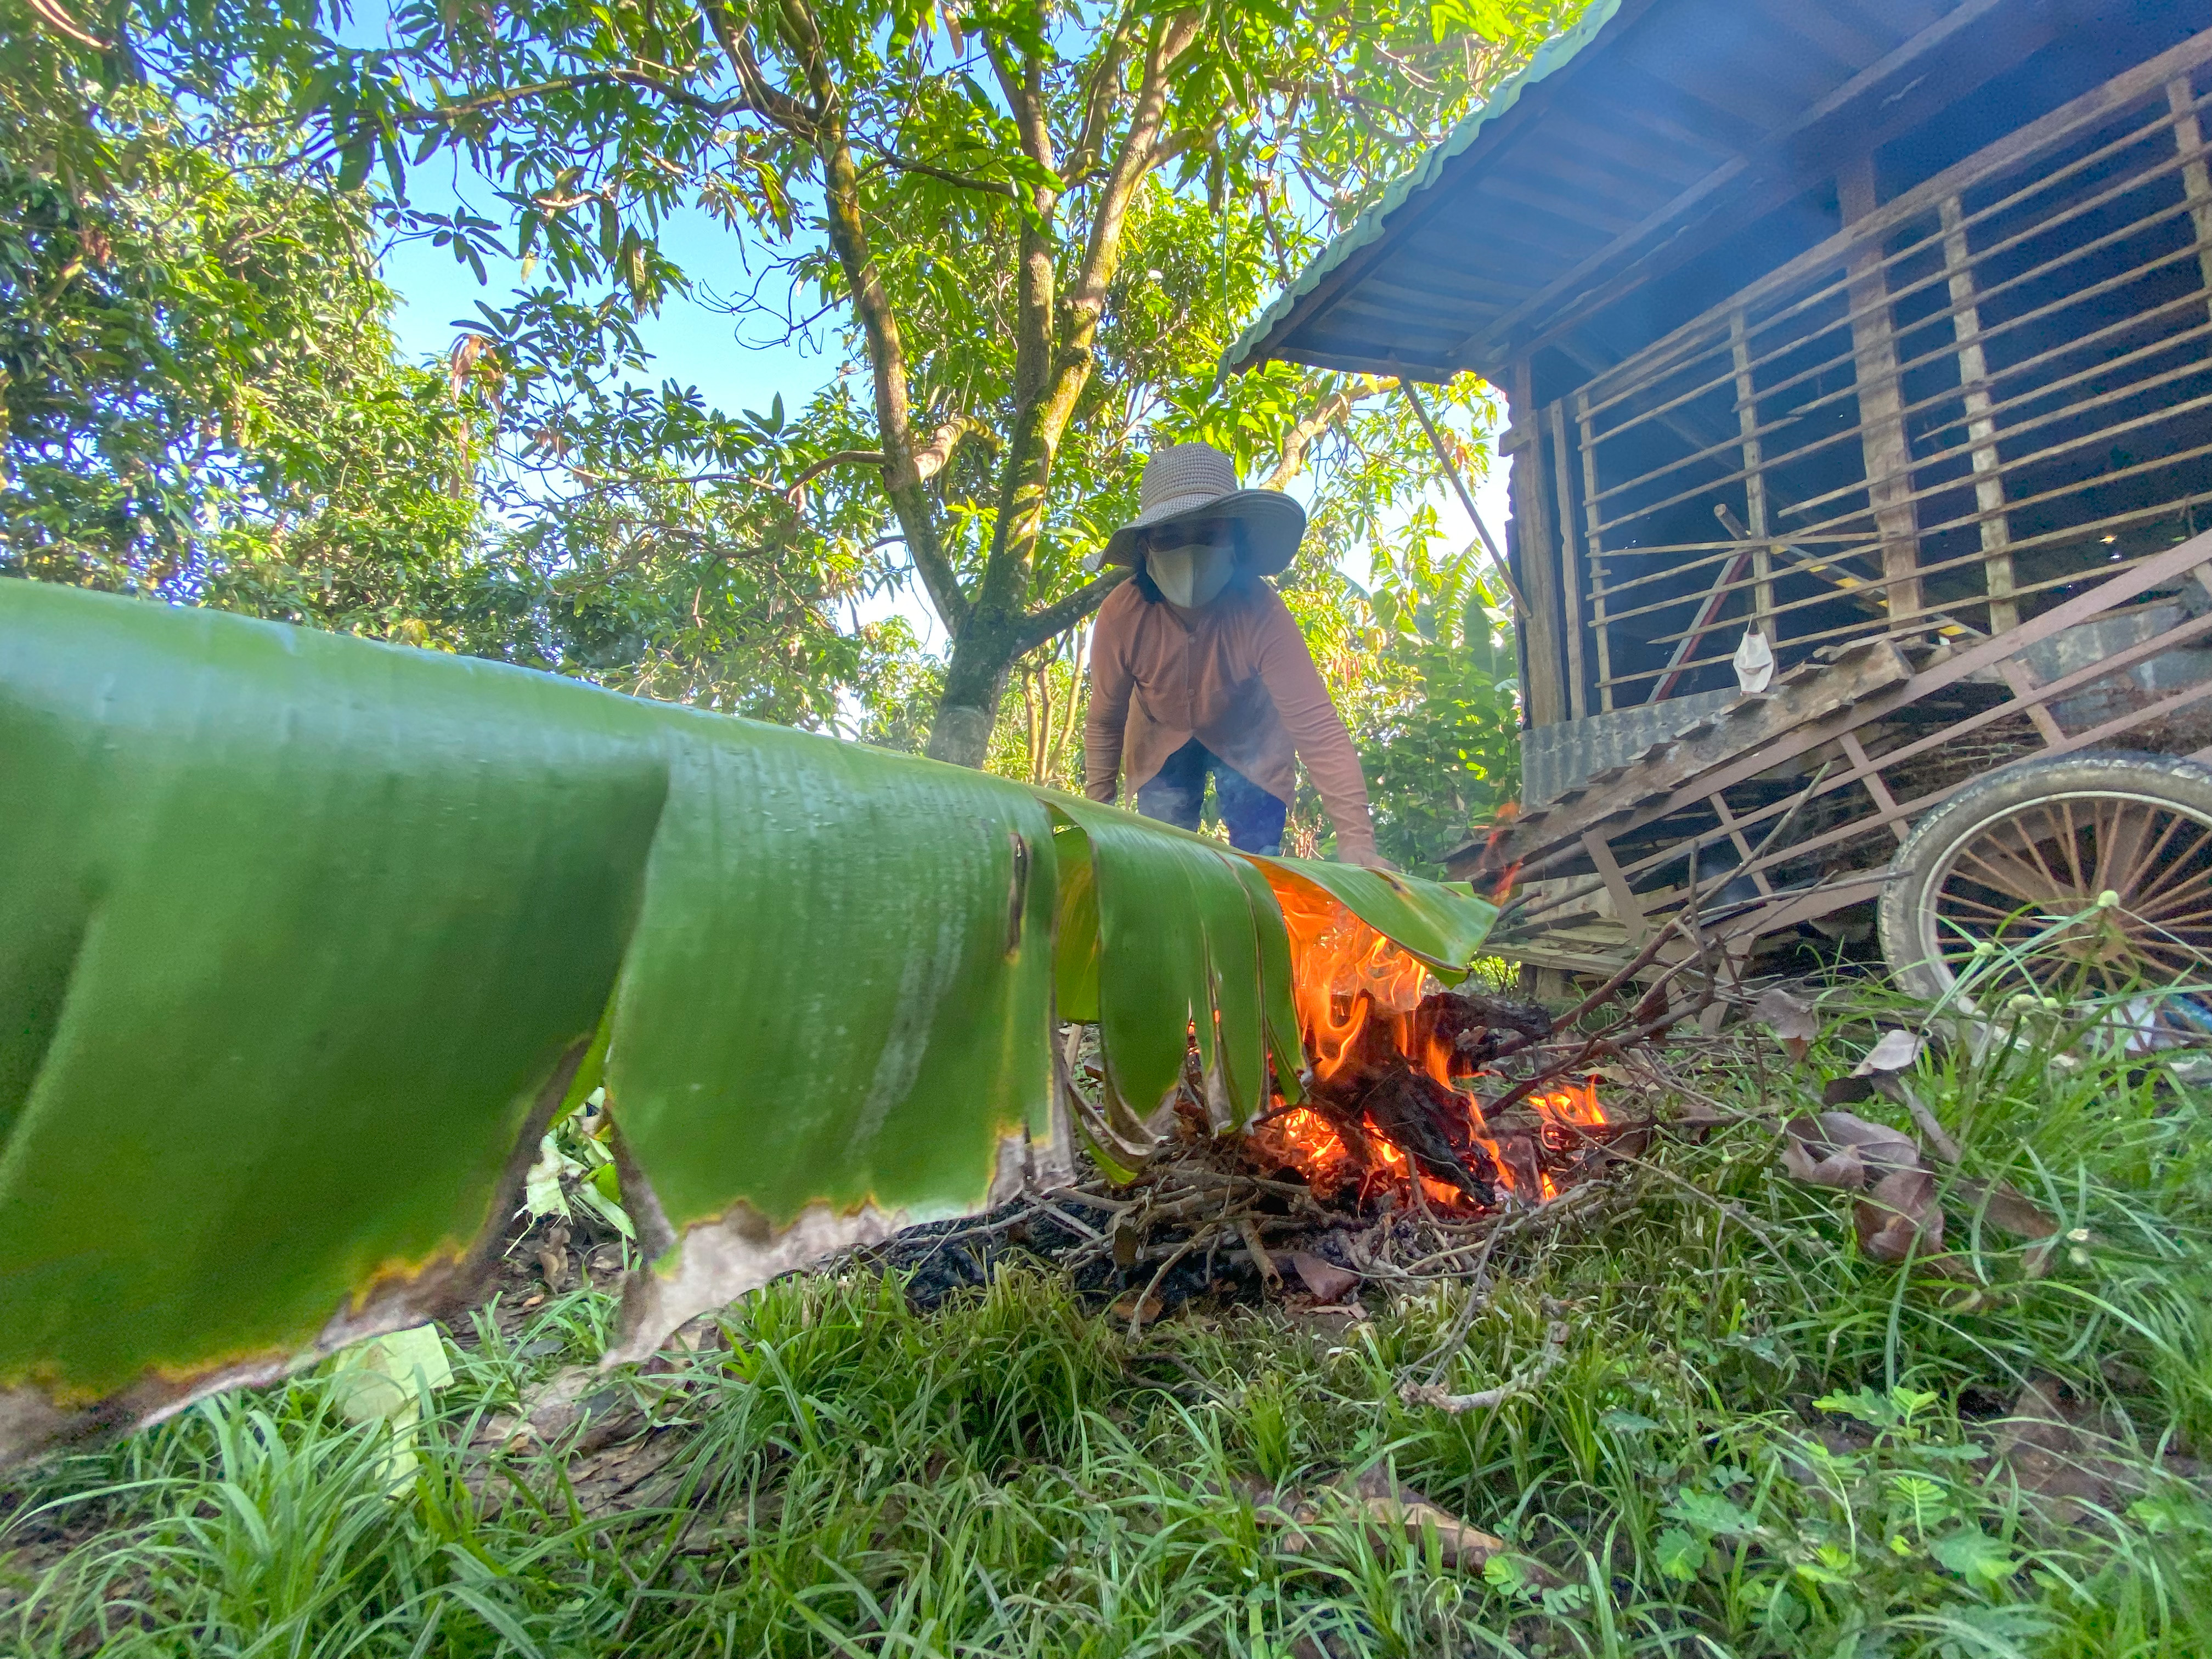 Lan scorches banana leaves on fire to prepare them for 'banh it.' Photo: Ngoc Phuong / Tuoi Tre News